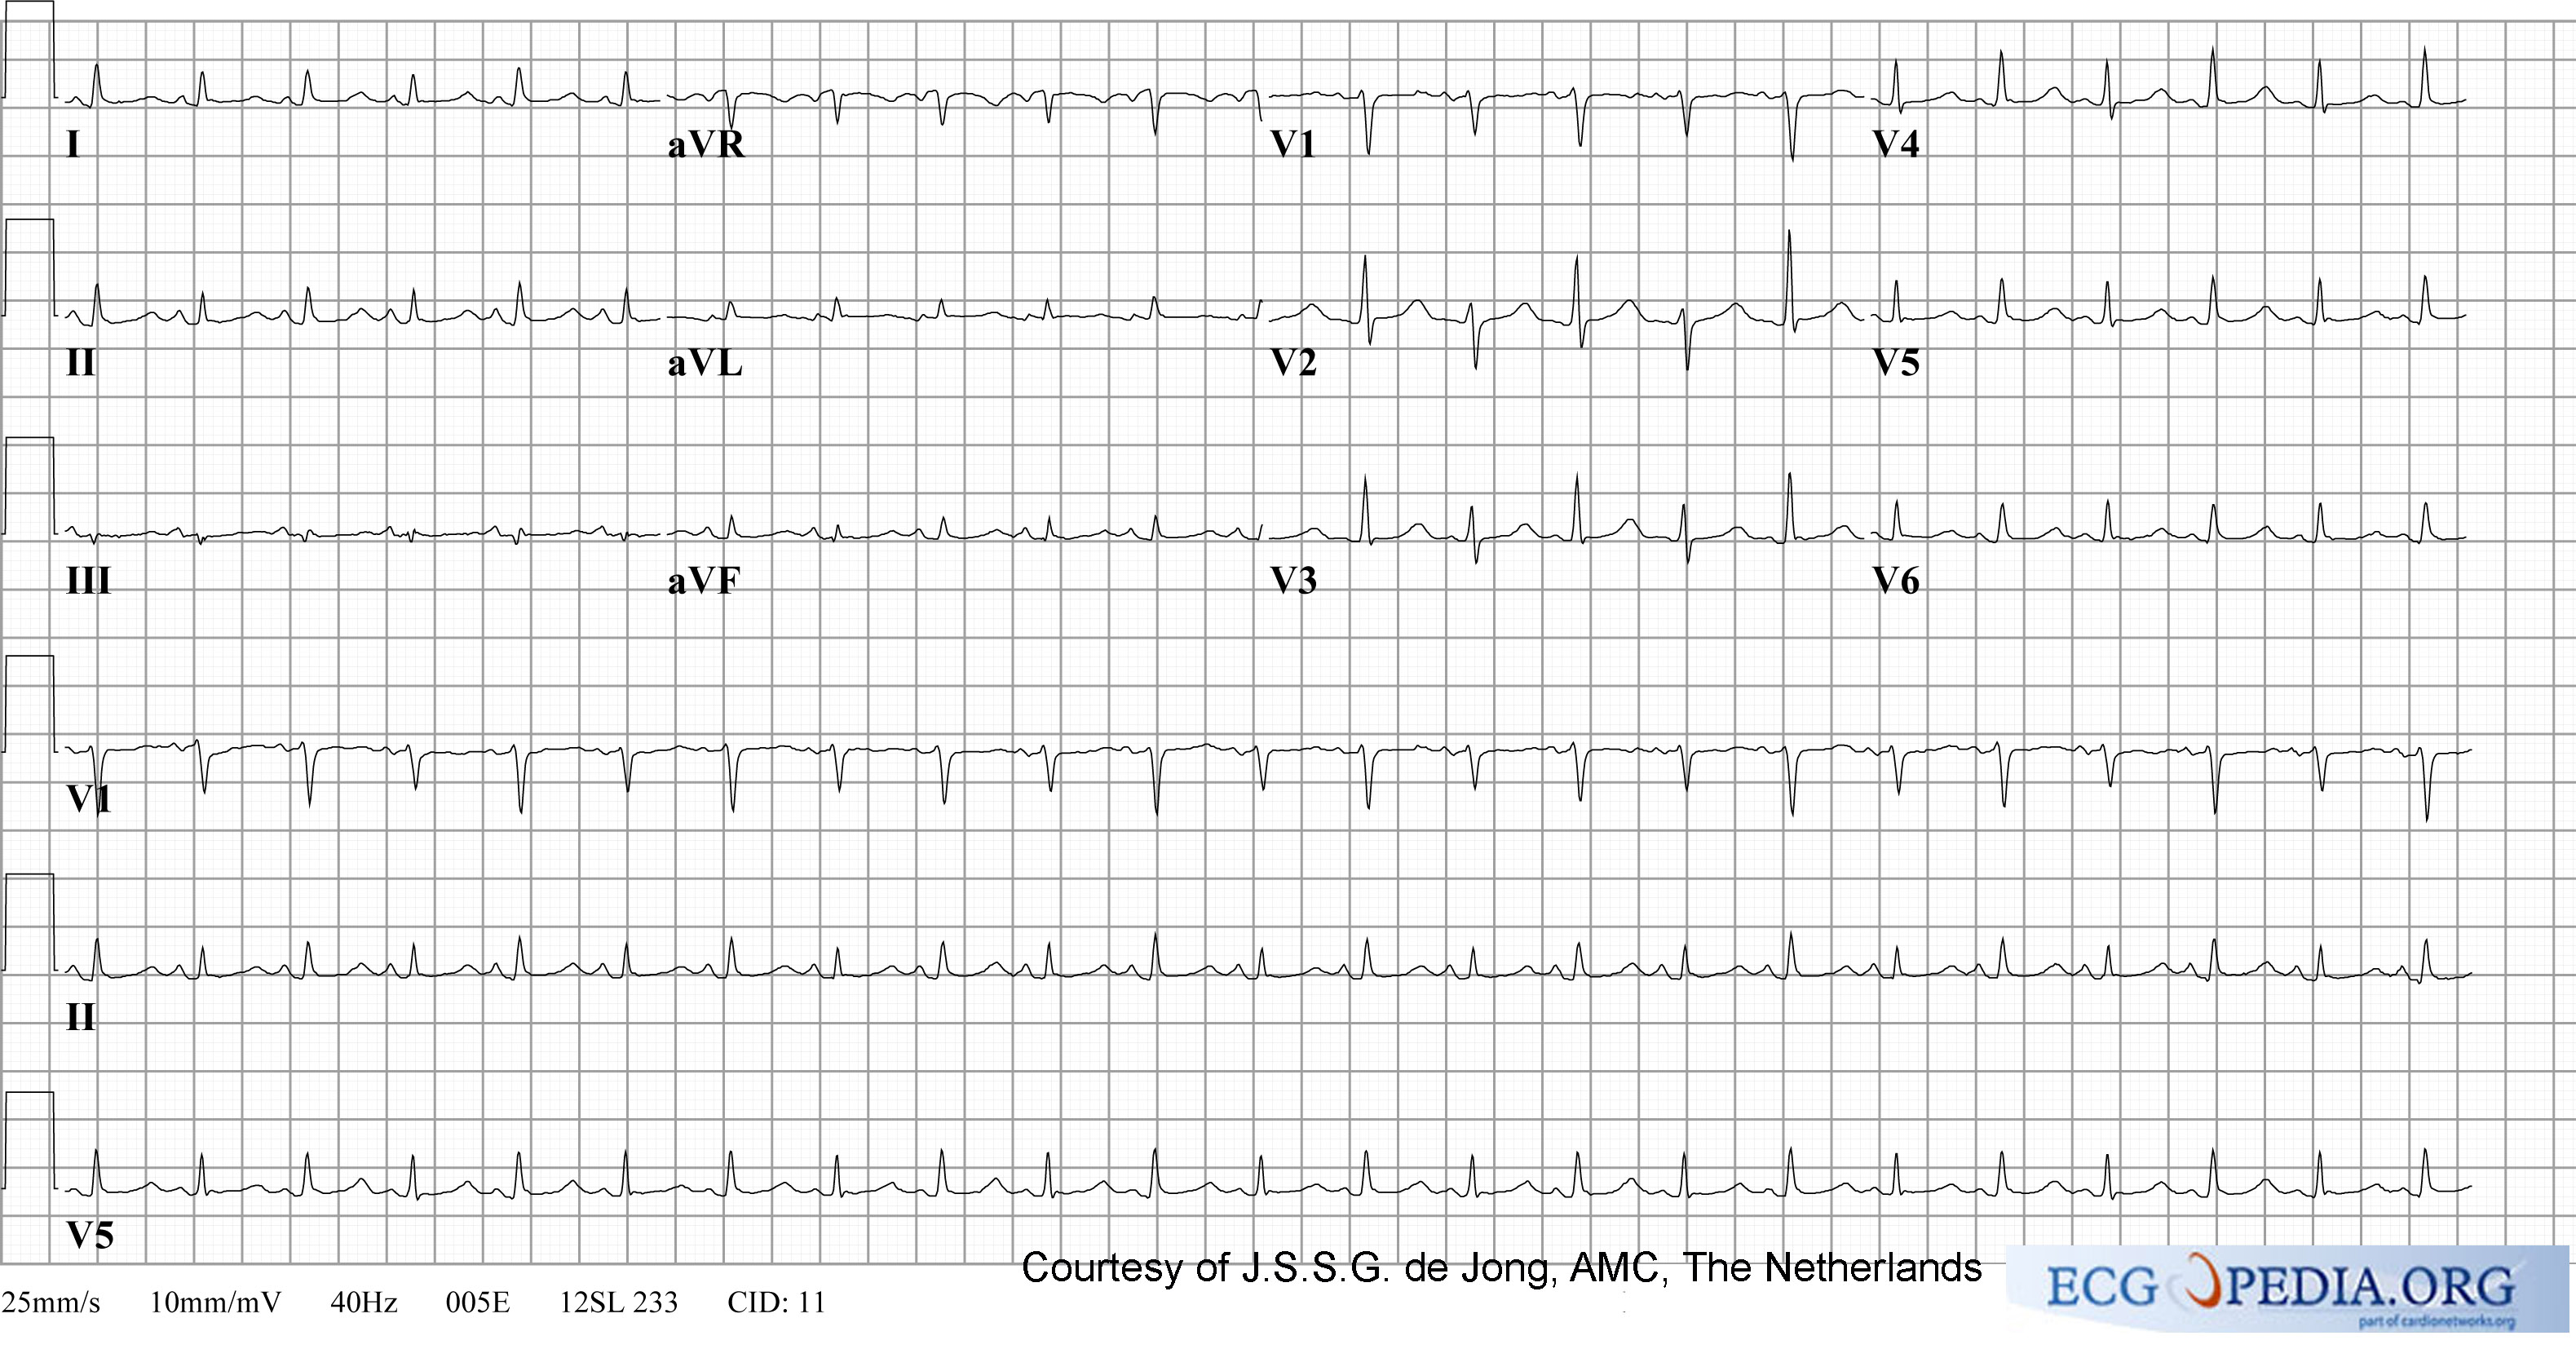 Cardiac Tamponade with low voltage QRS complex and Electrical Alternans